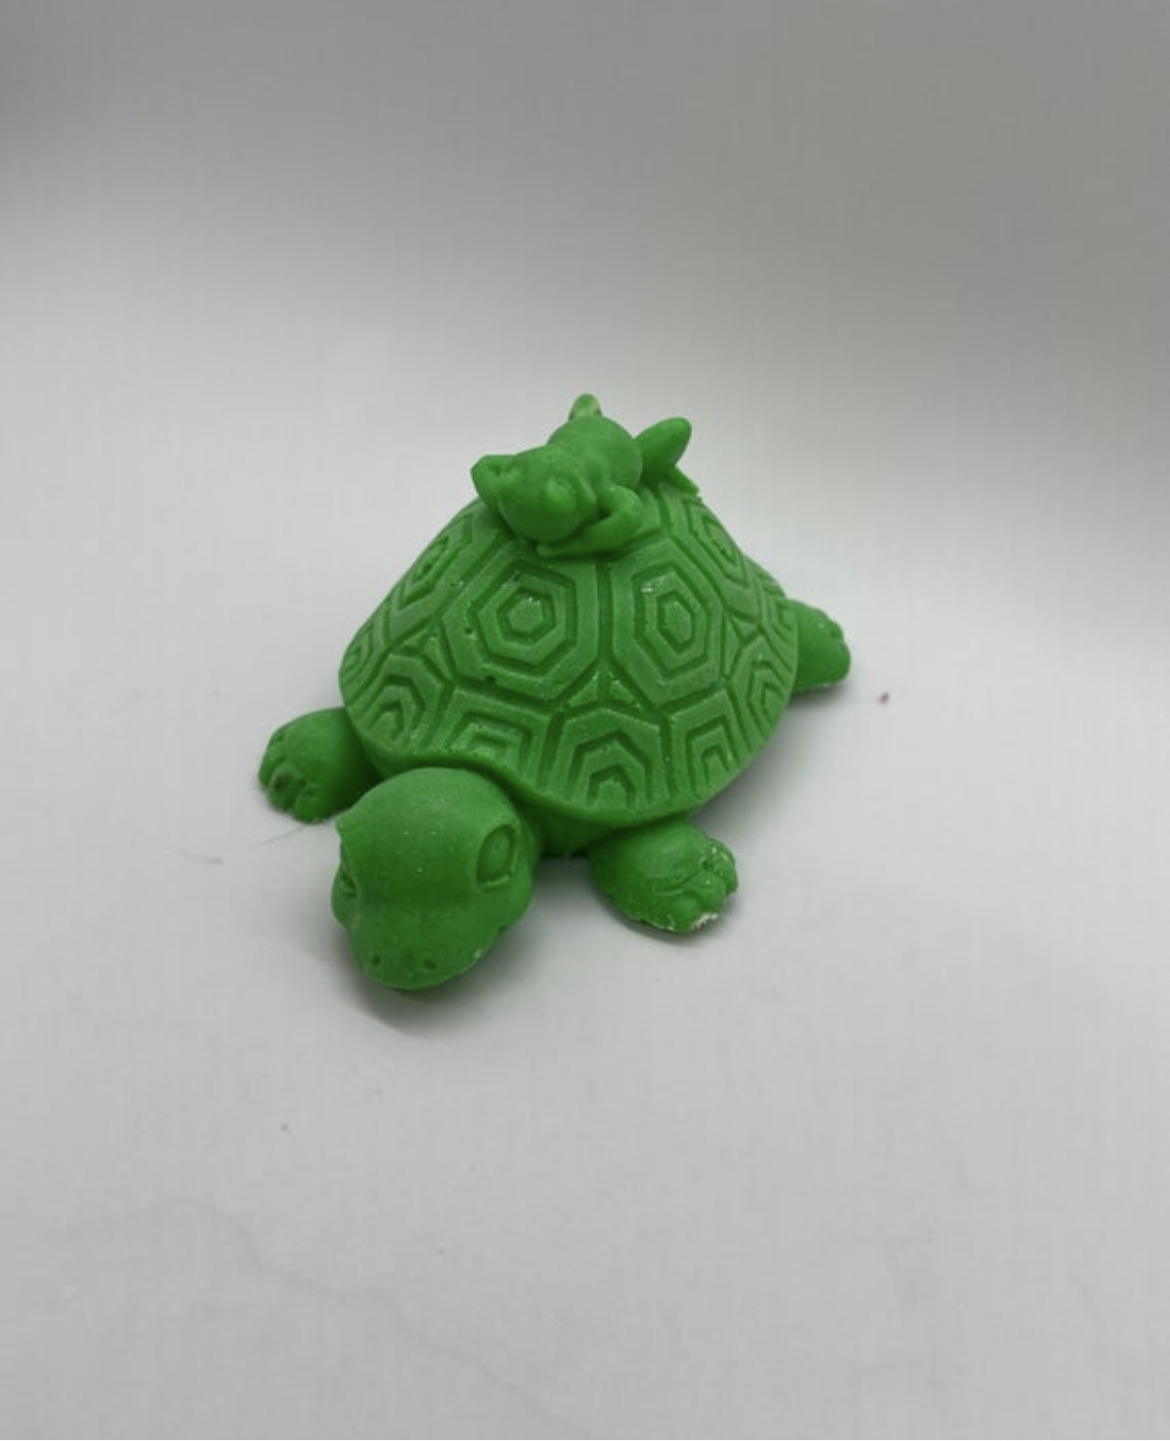 Turtle and Frog Soap Bar VARIES IN COLORS